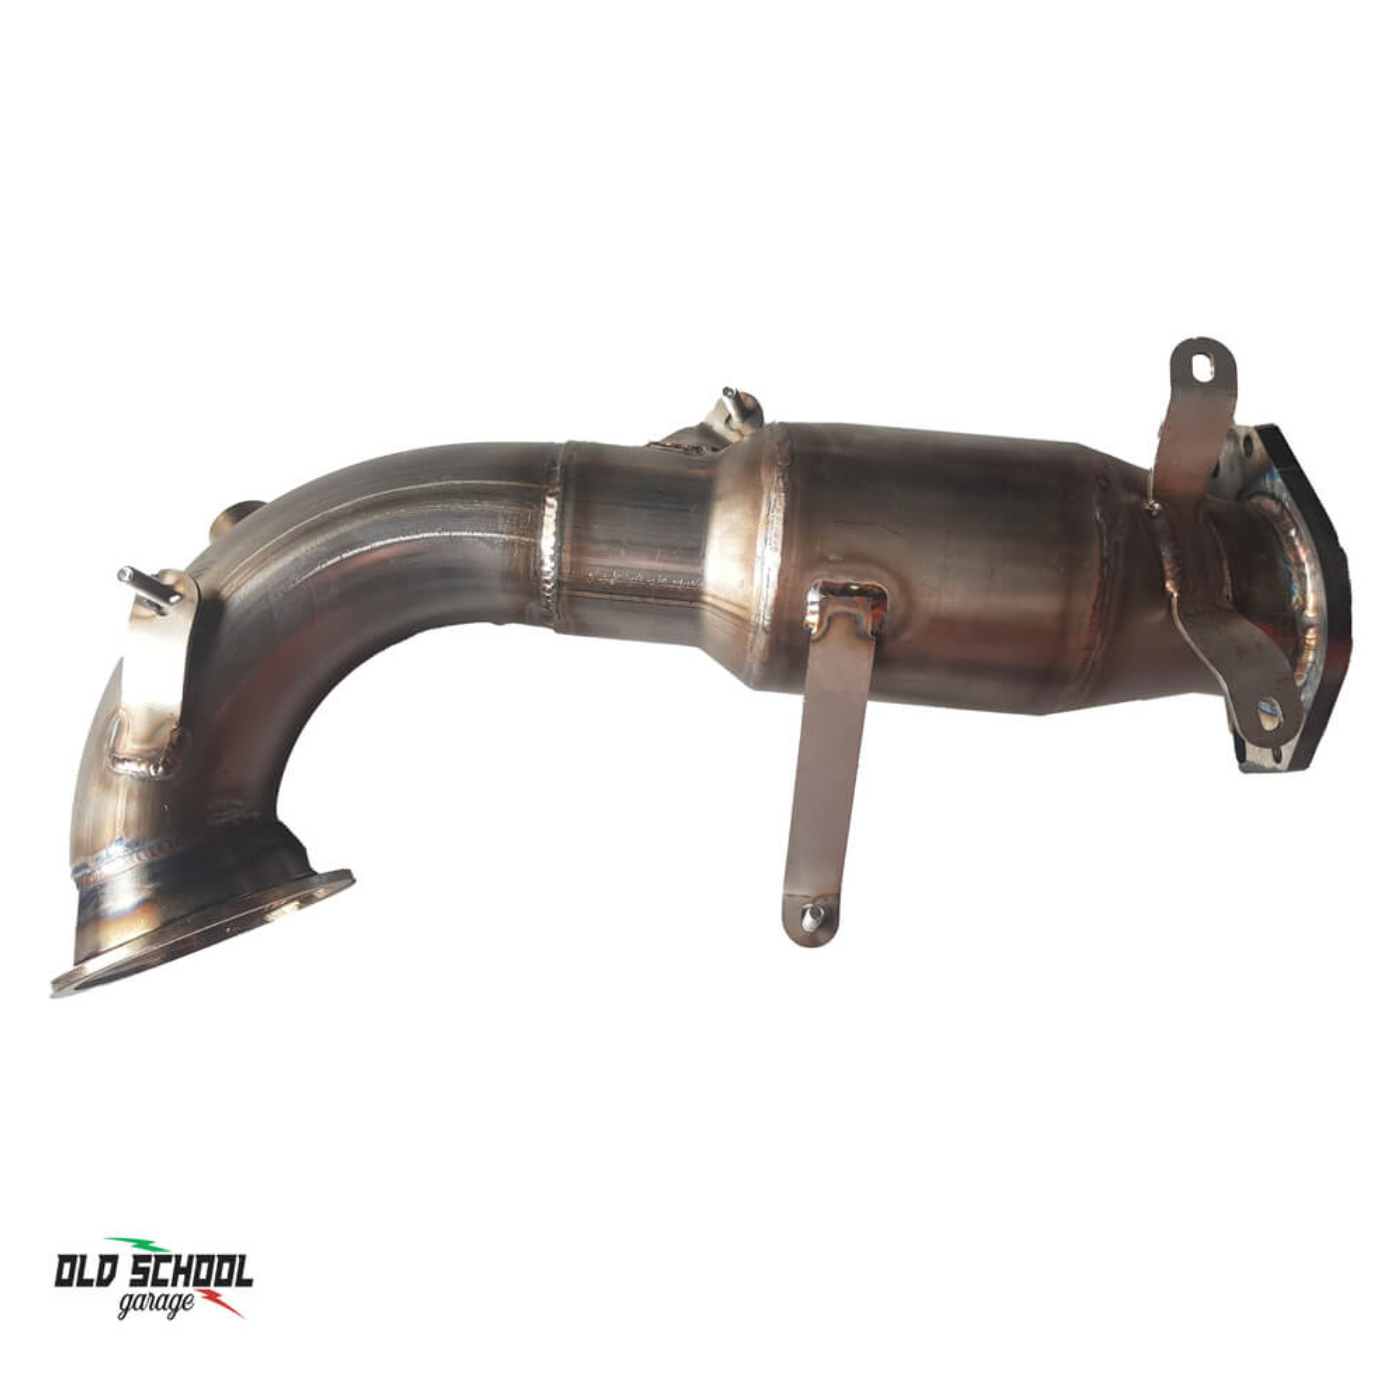 DOWNPIPE 200 CELLE 1446 - 500 ABARTH - OLD SCHOOL GARAGE